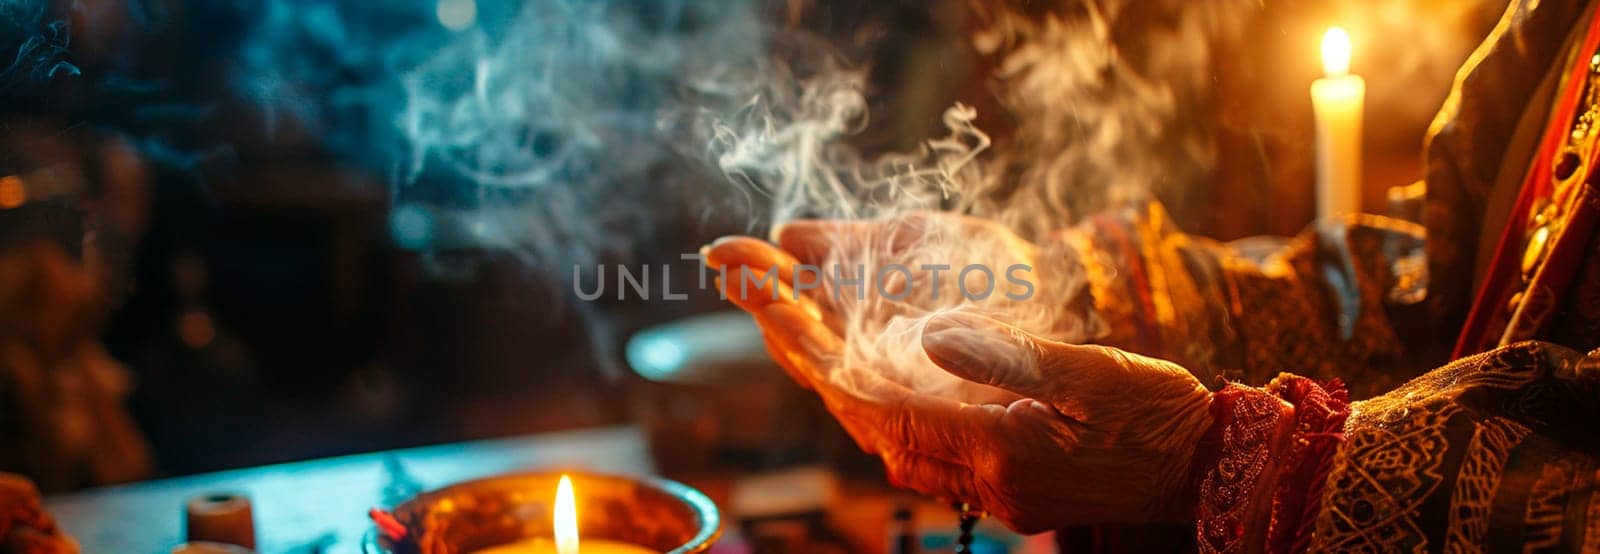 Fortune teller tells fortunes with candles and smoke. Selective focus. by yanadjana